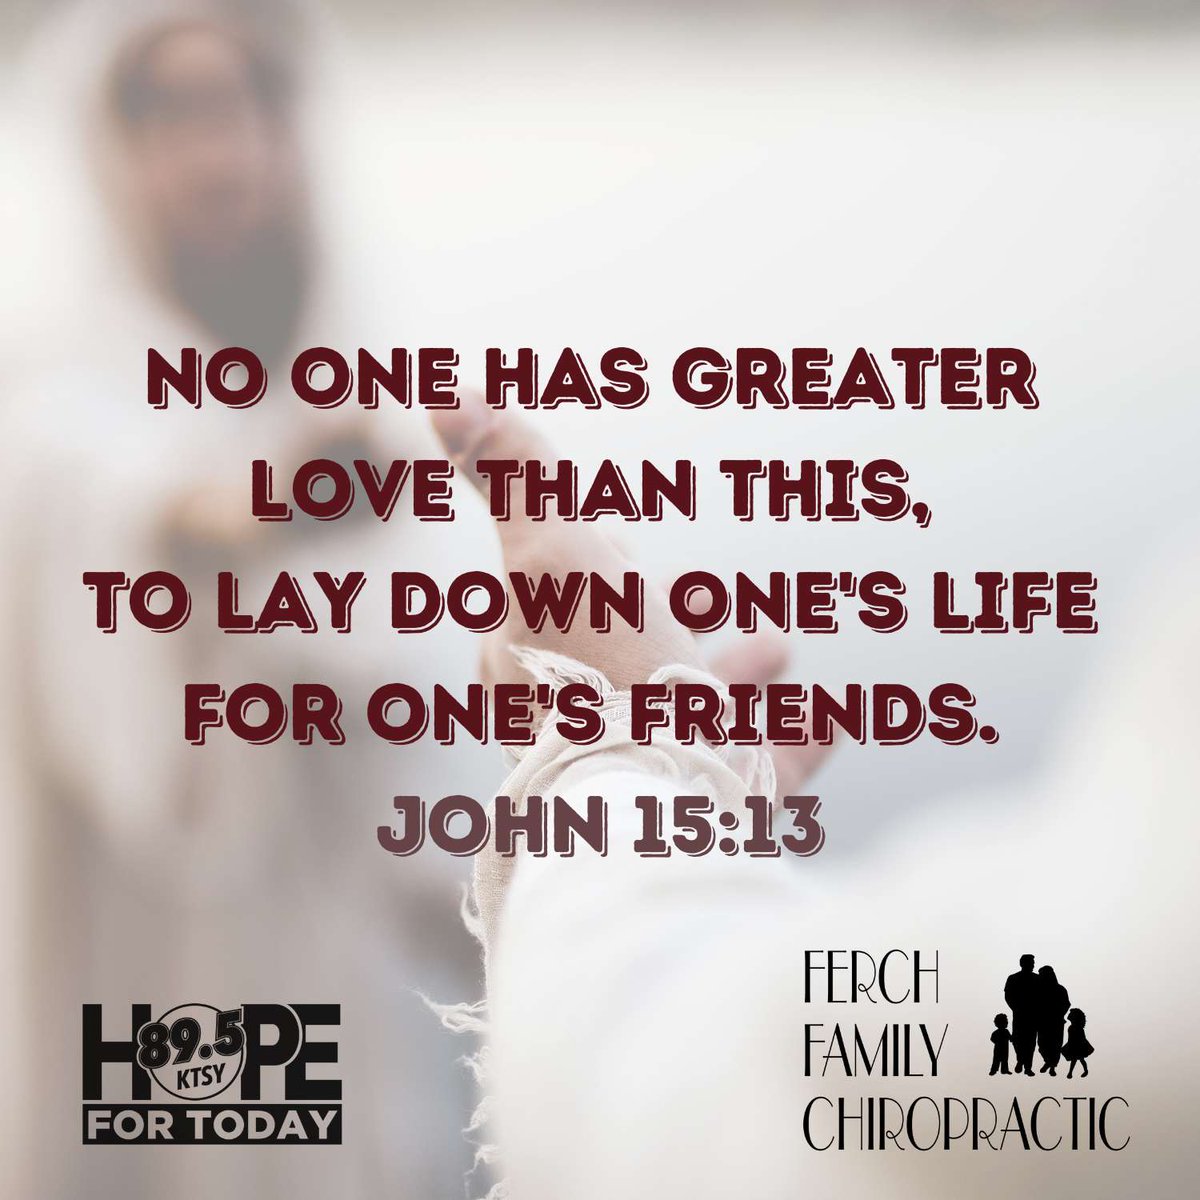 Jesus, thank you for laying down your life for us. #hopefortoday #choosehope #bible #scripture